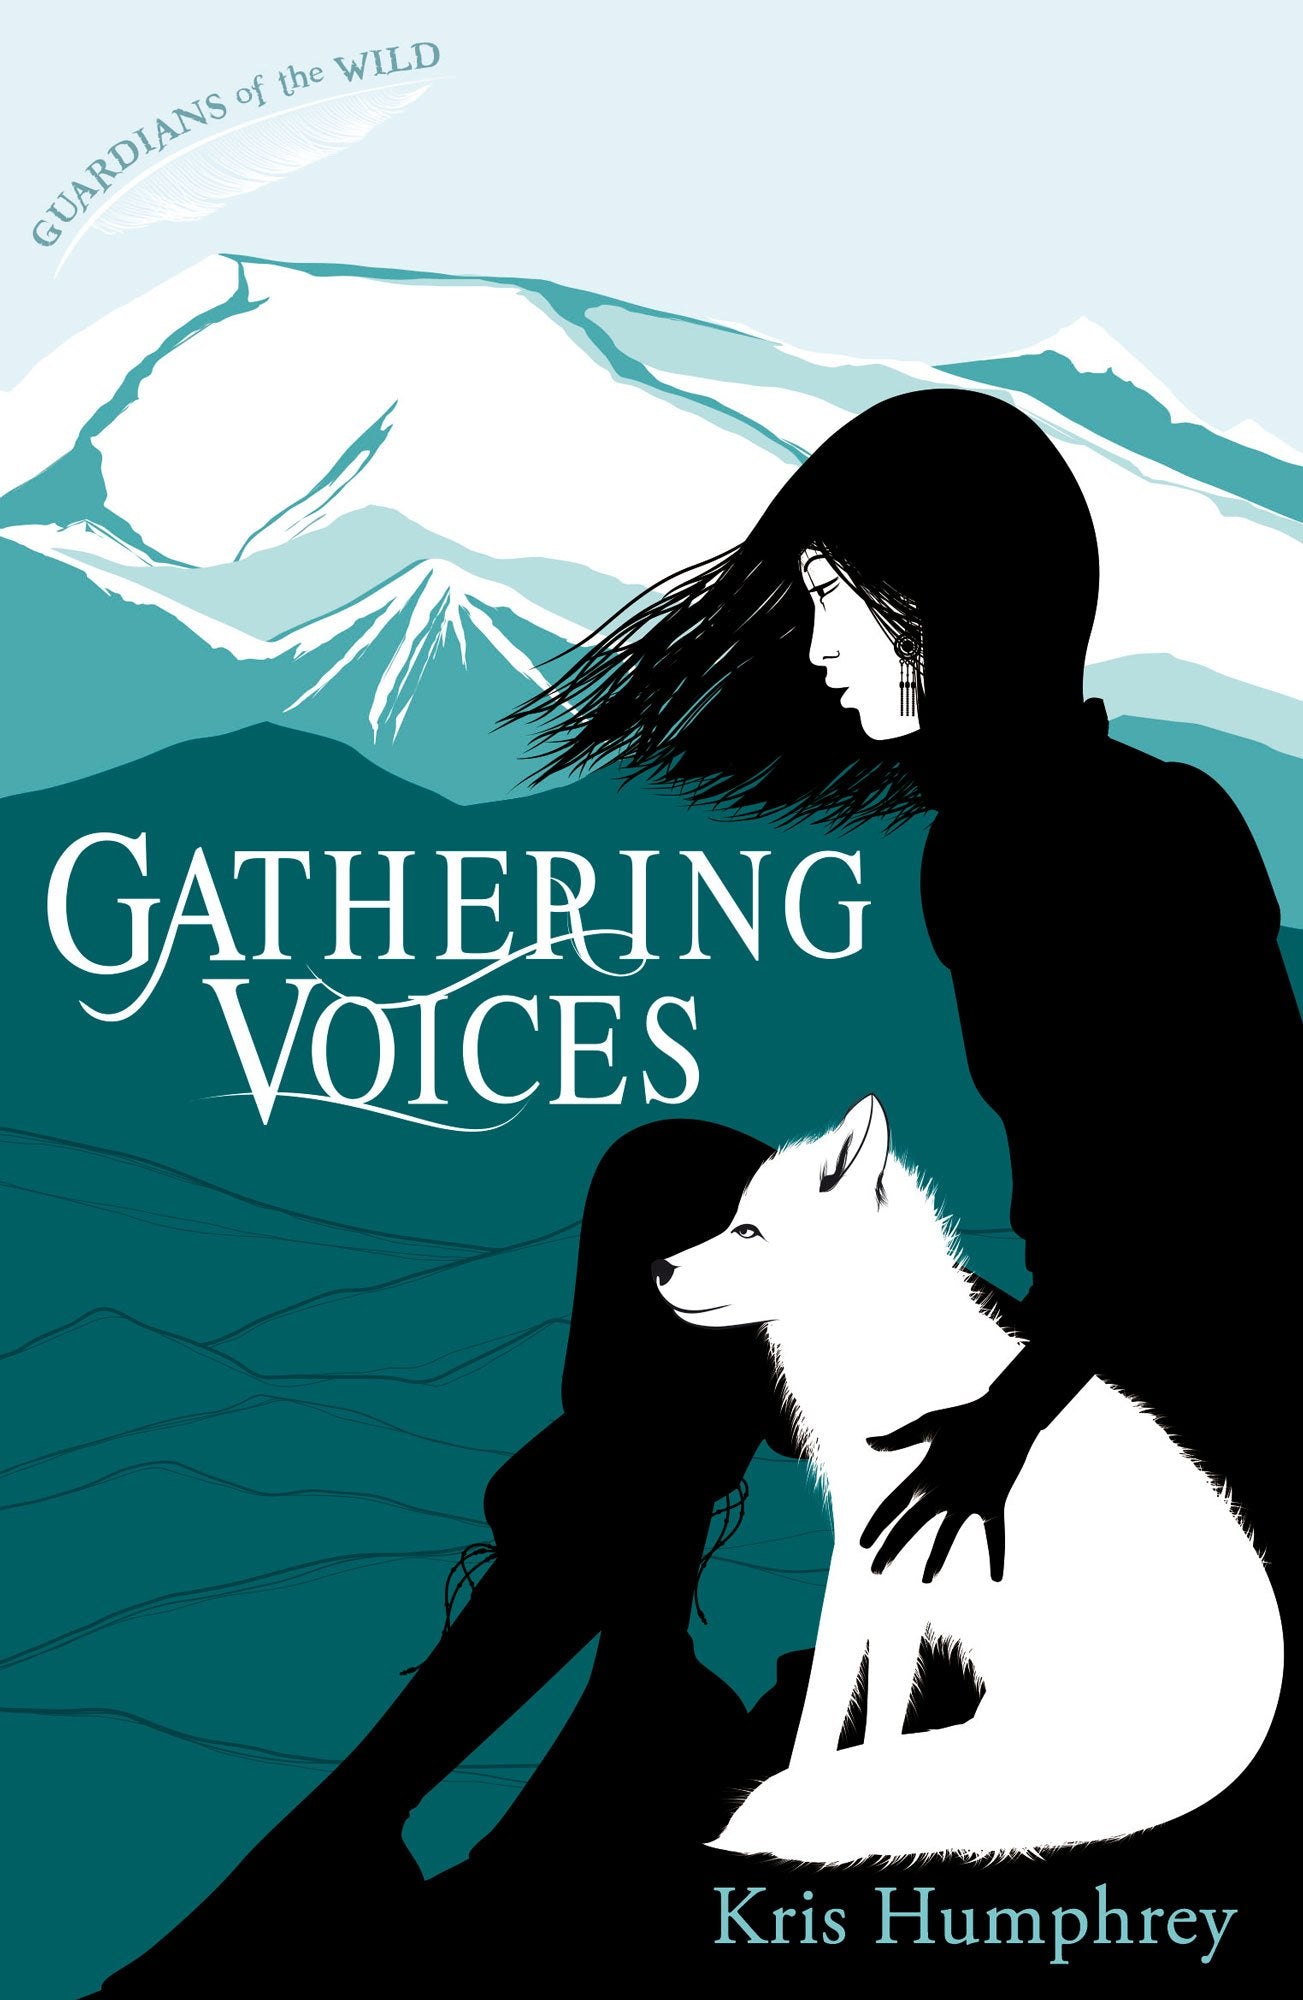 Gathering Voices (Guardians of the Wild Book 3)